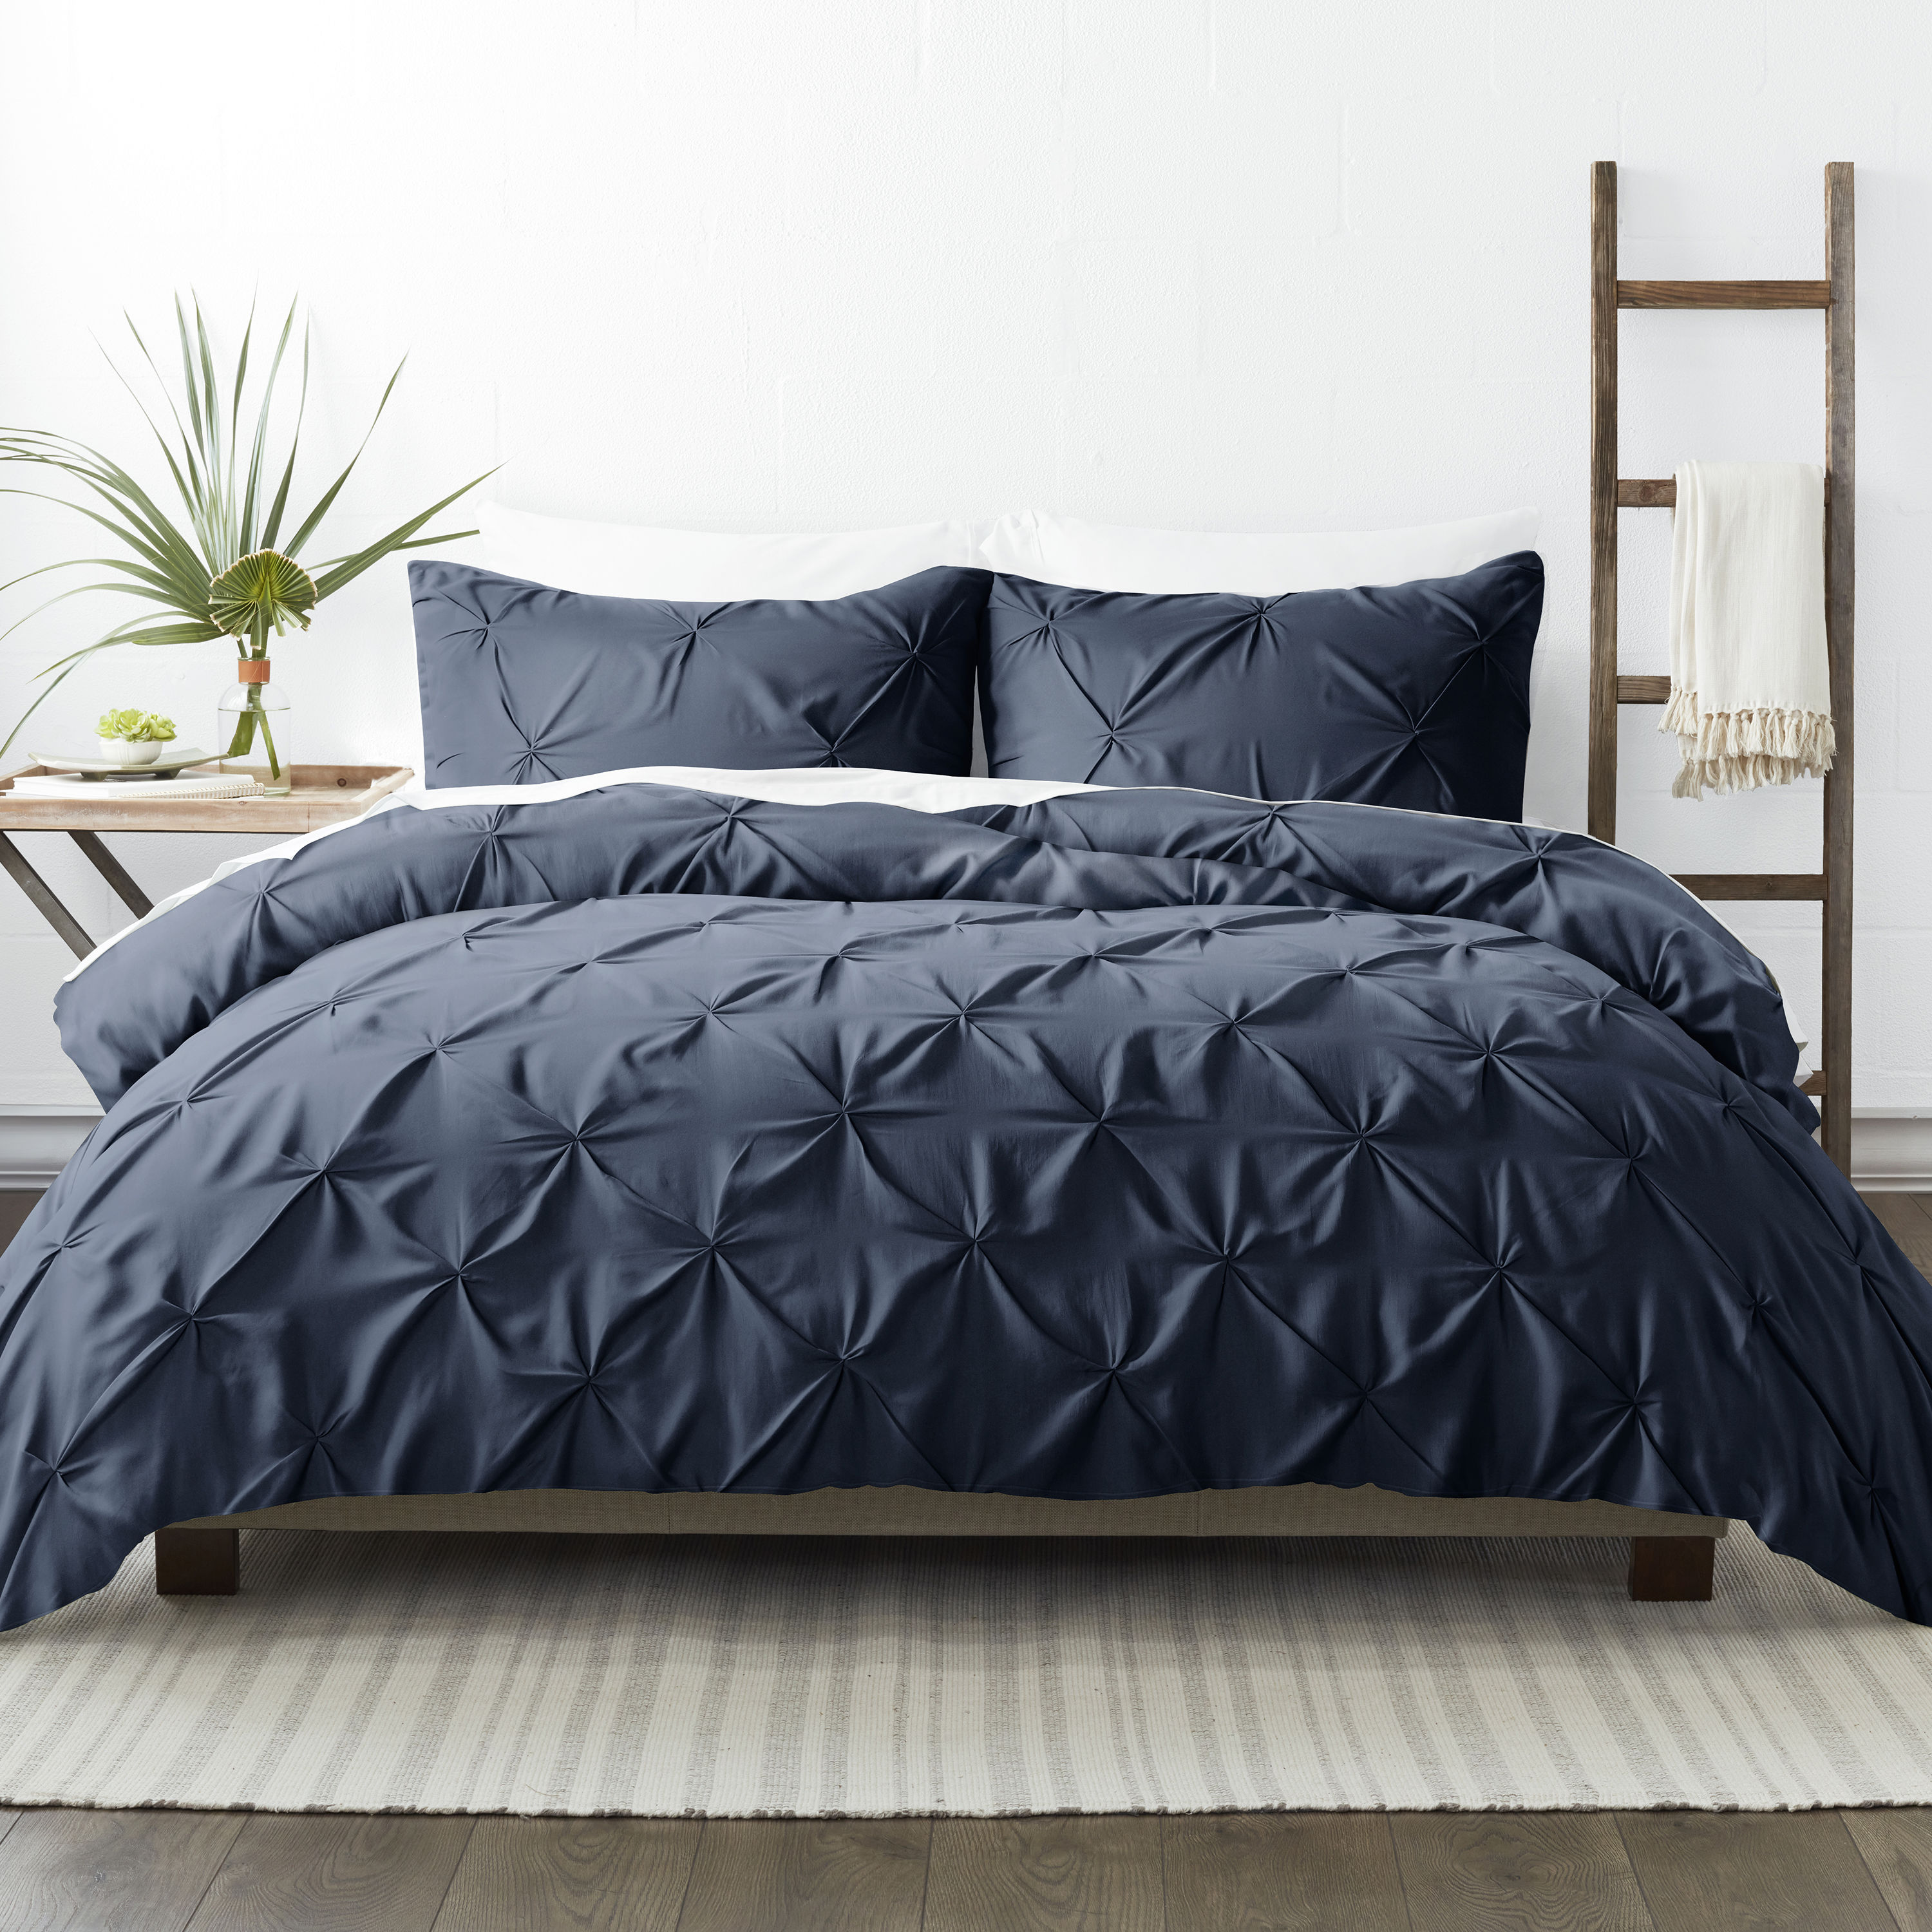 Solid Navy Blue Pintuck Pleated 3 pc Comforter Set Twin Full Queen King Bedding 